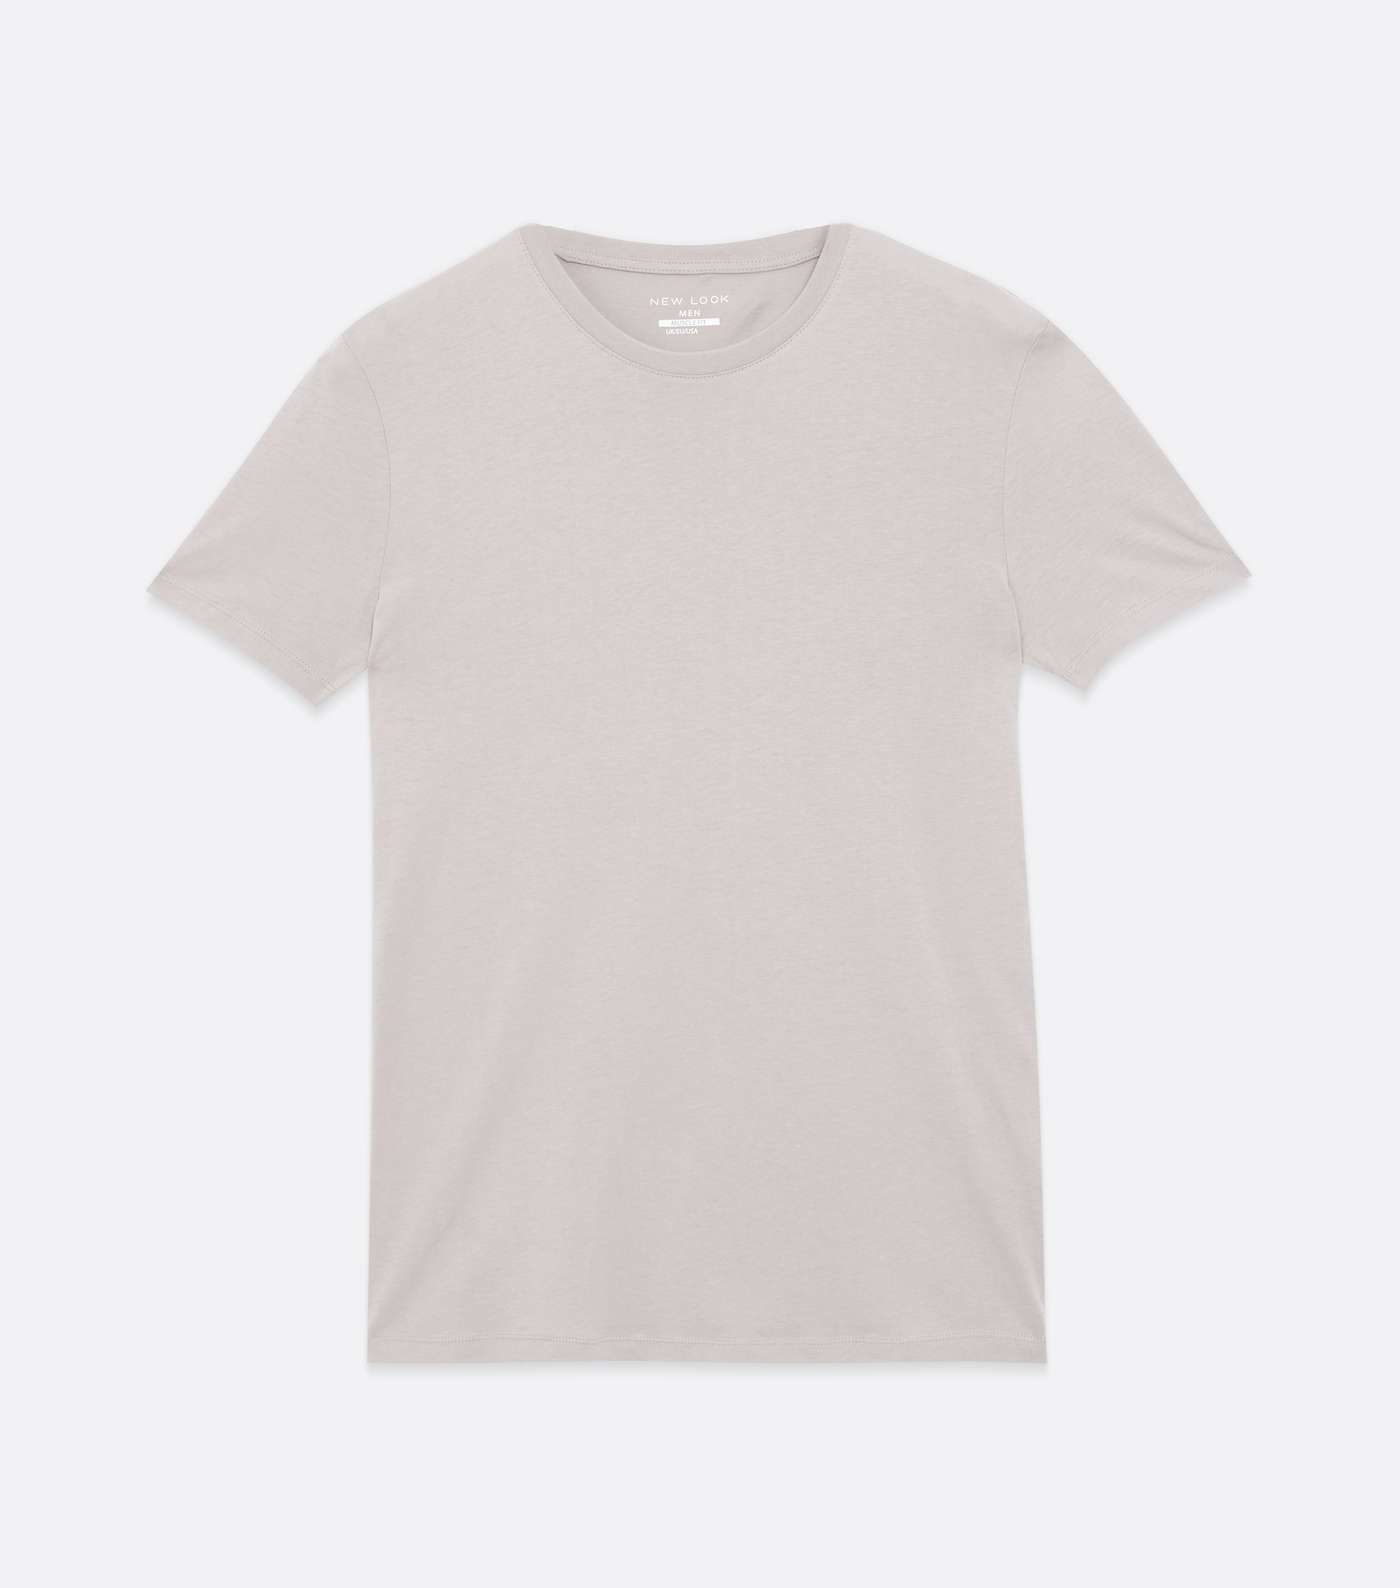 Pale Grey Short Sleeve Muscle Fit Crew T-Shirt Image 5